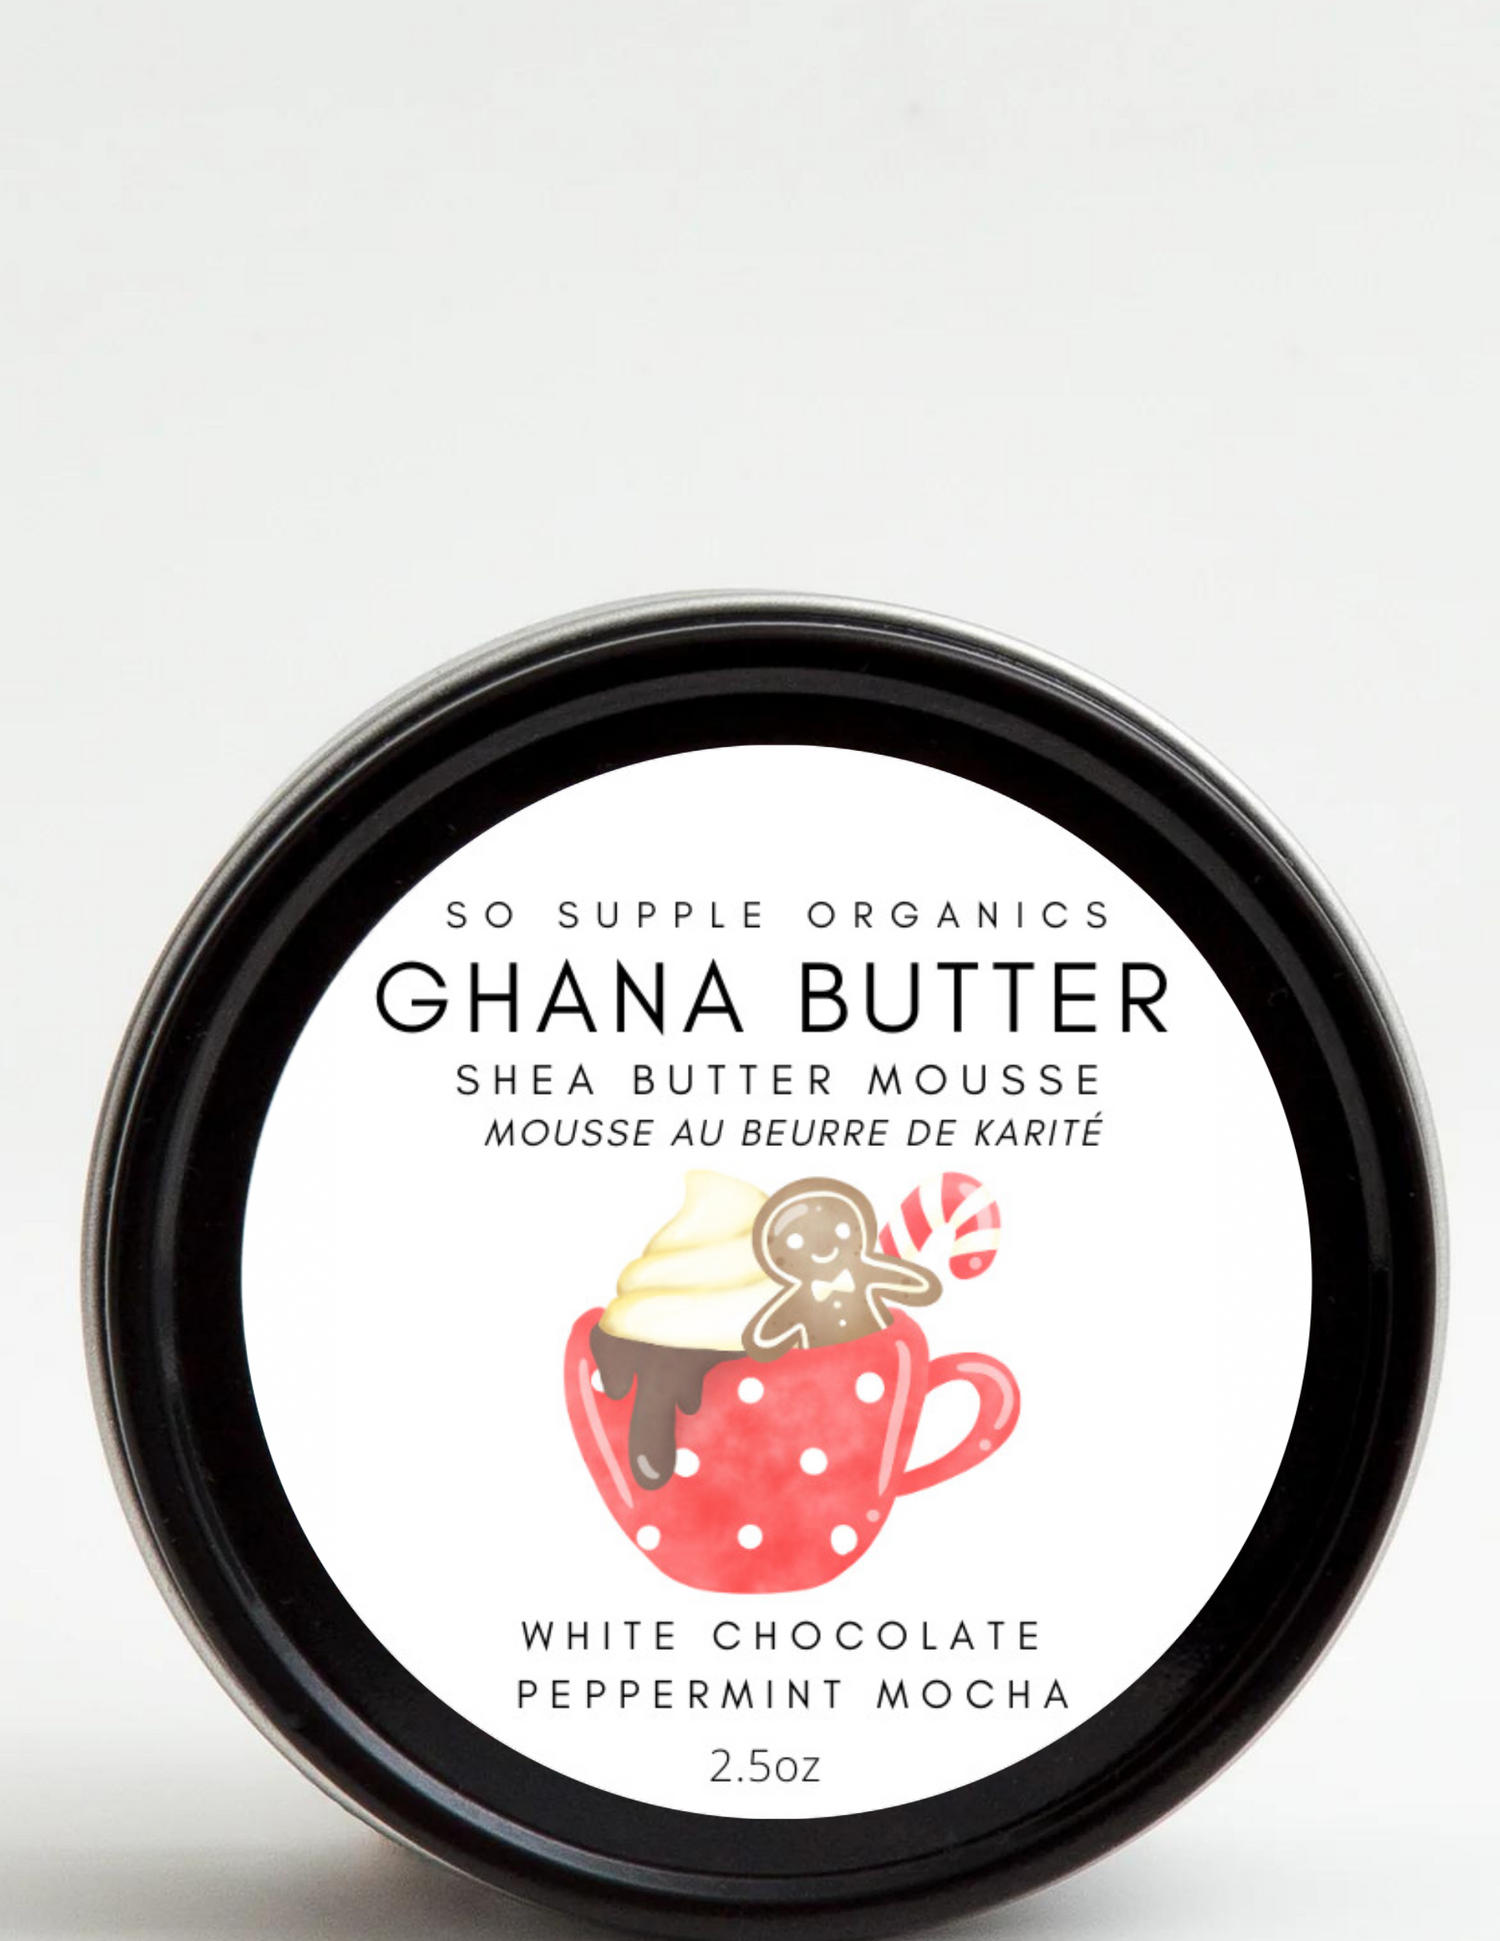 GHANA BUTTER Shea Butter Mousse- White Chocolate Peppermint Scent